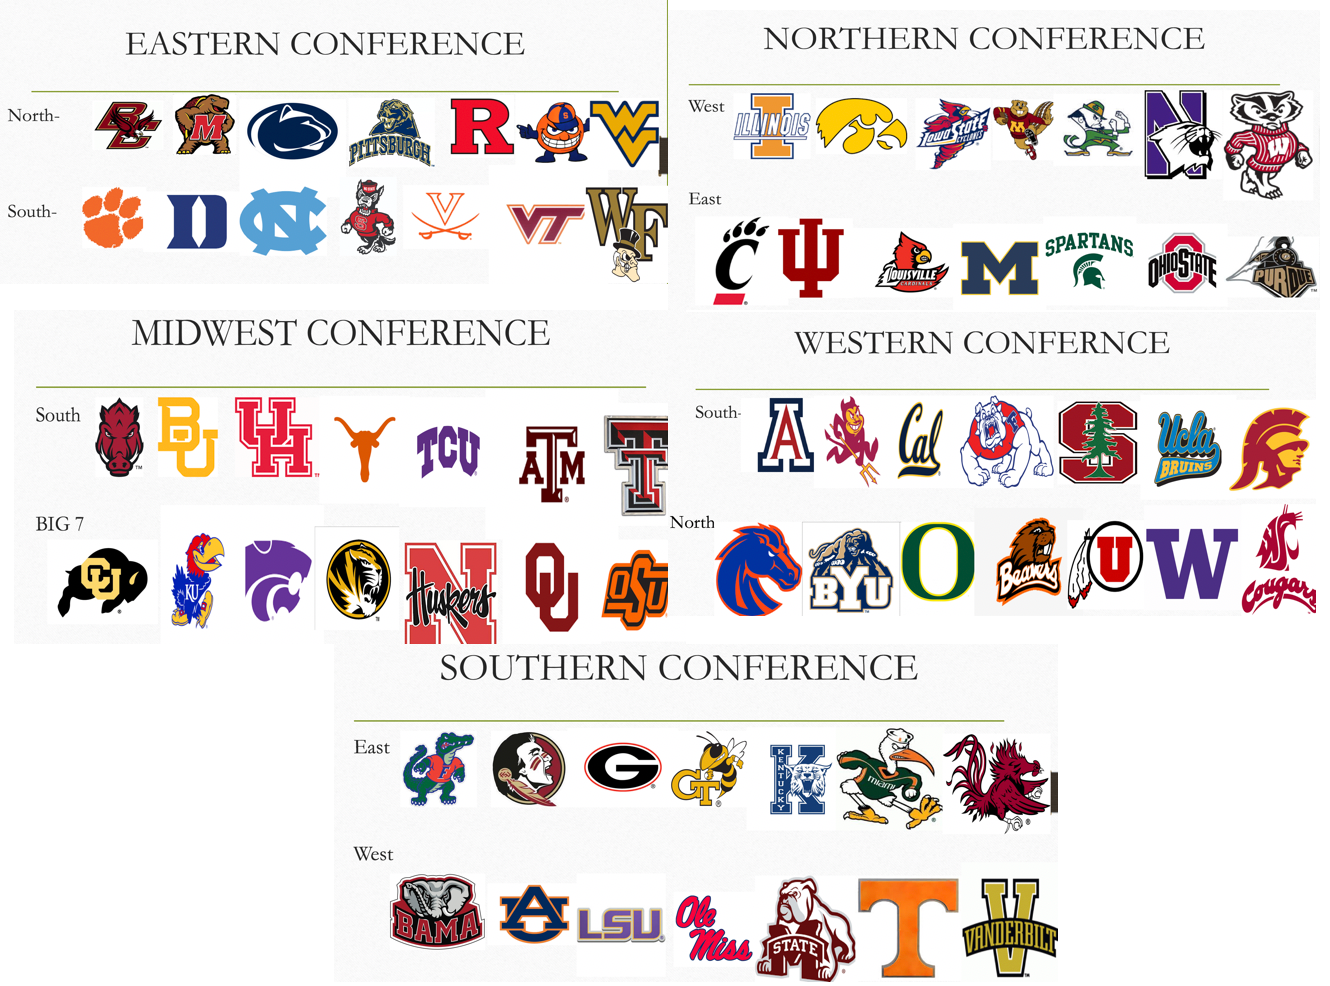 What If College Football Conferences Made Sense? by Jake Myers Jun